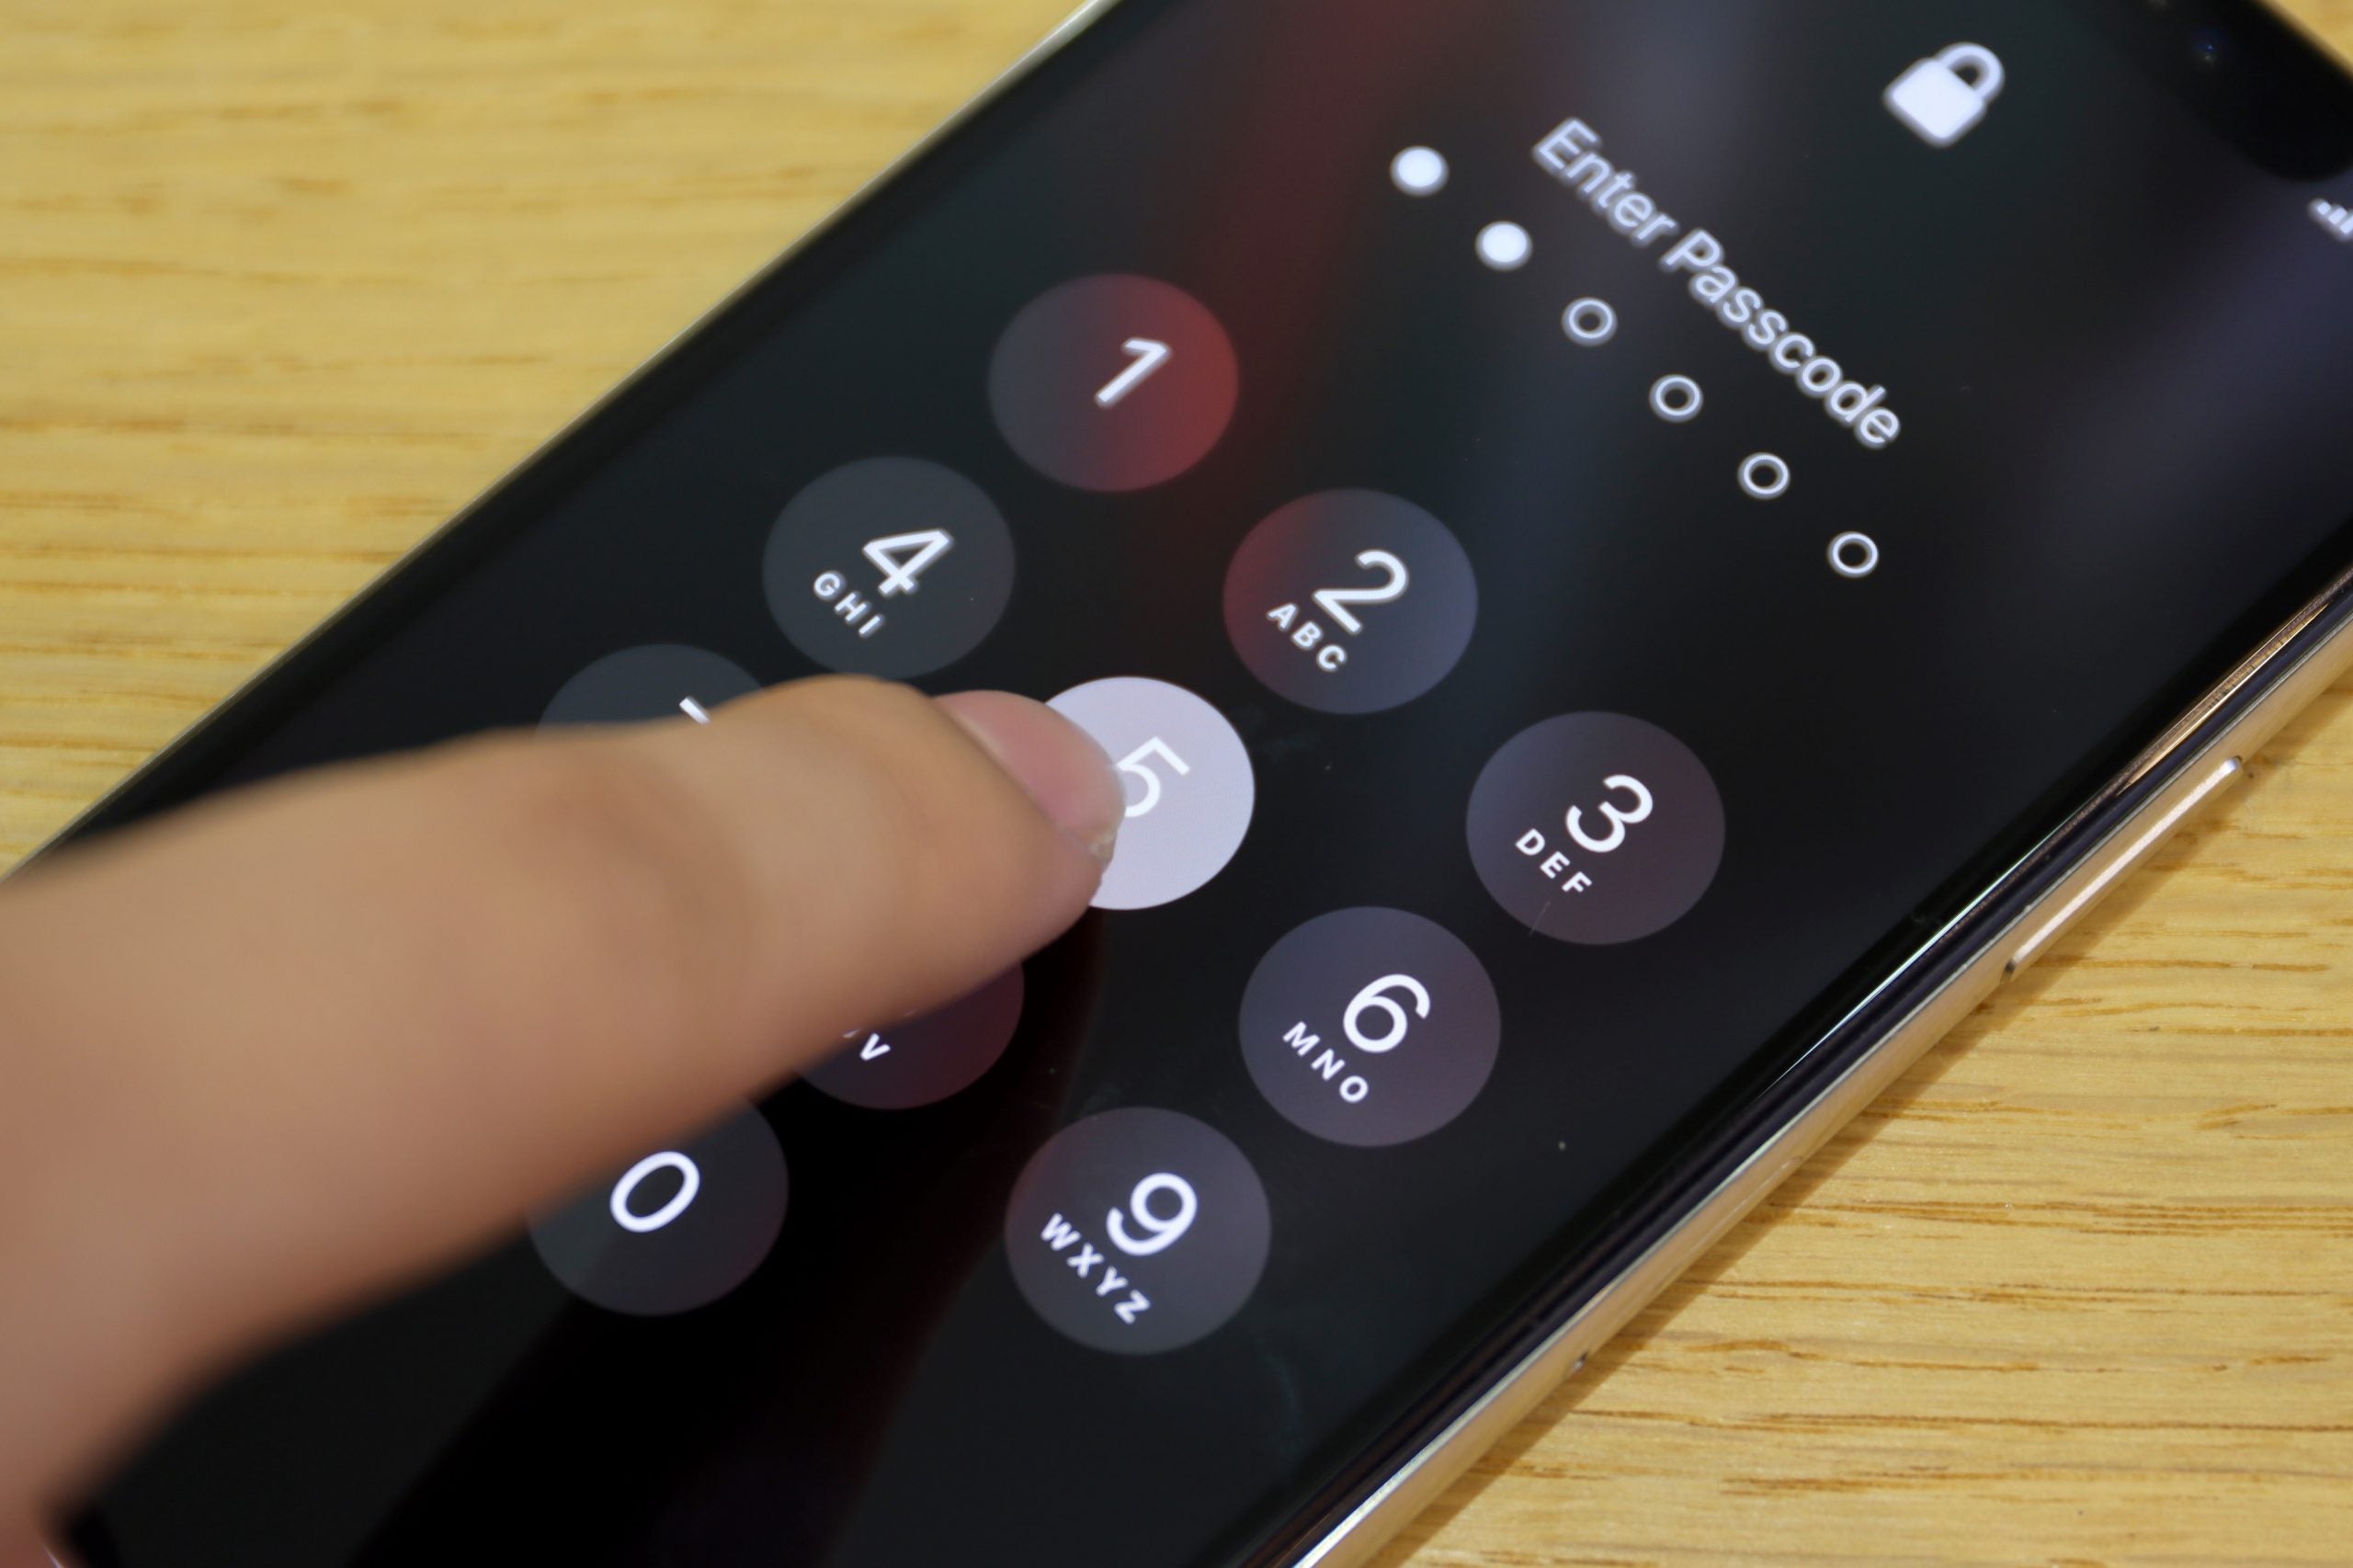 Guide: How To unlock iPhone or Samsung if You Forgot Your PIN?